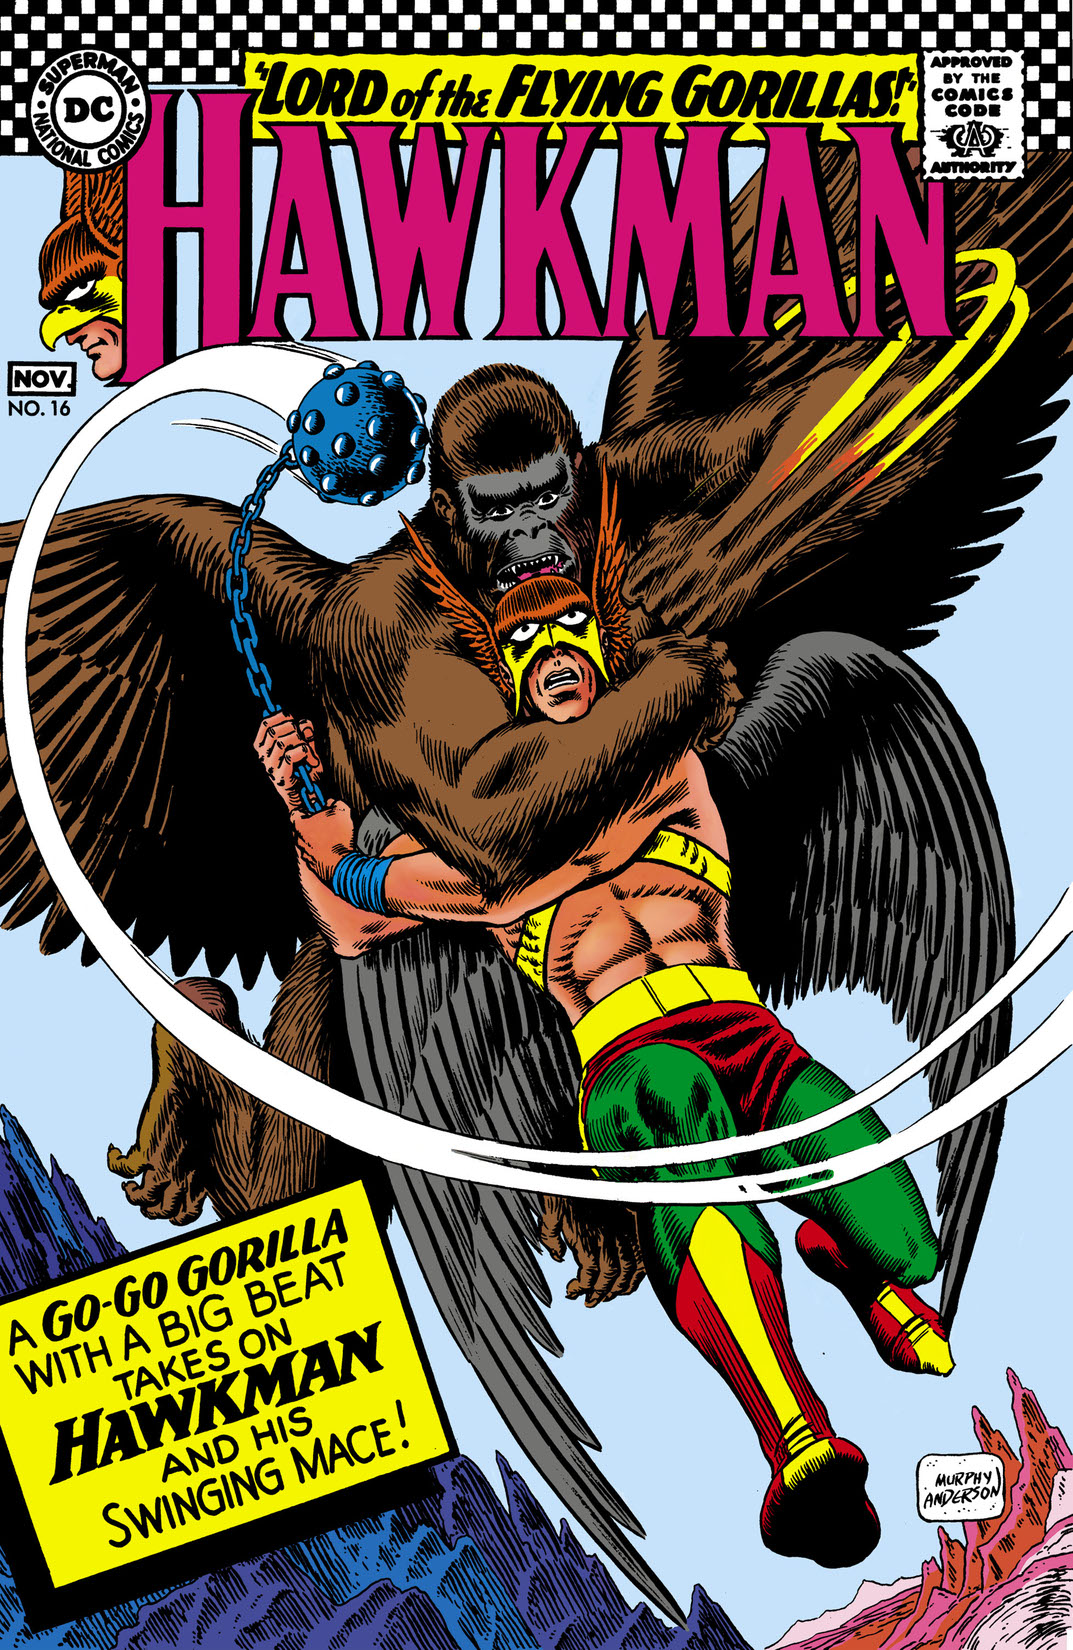 Hawkman (1964-) #16 preview images